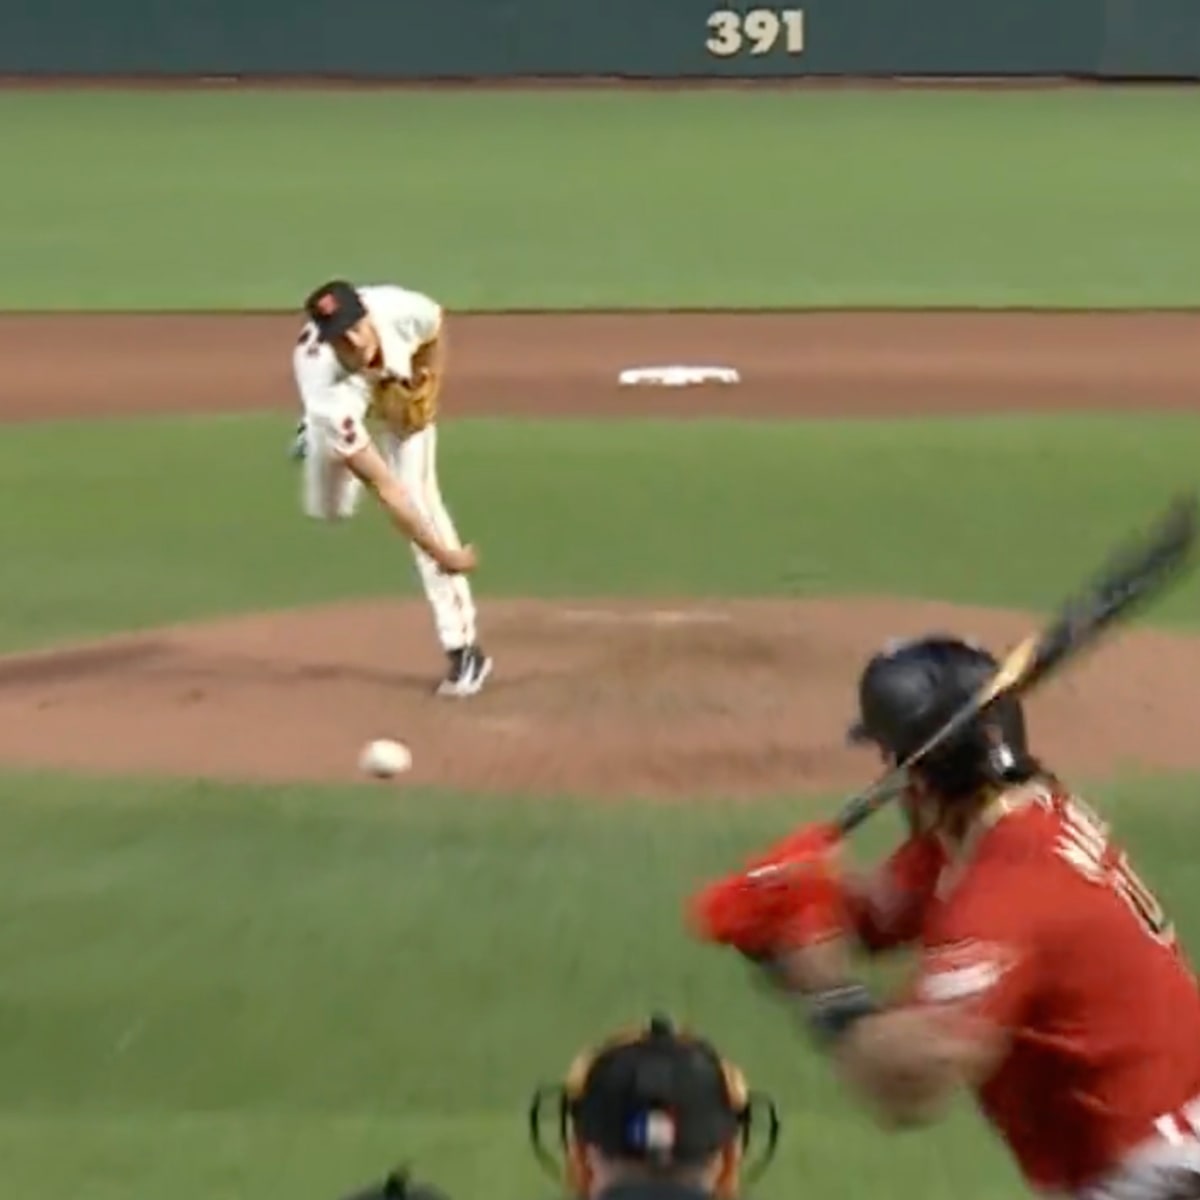 Giants reliever Tyler Rogers throws a pitch that defies gravity